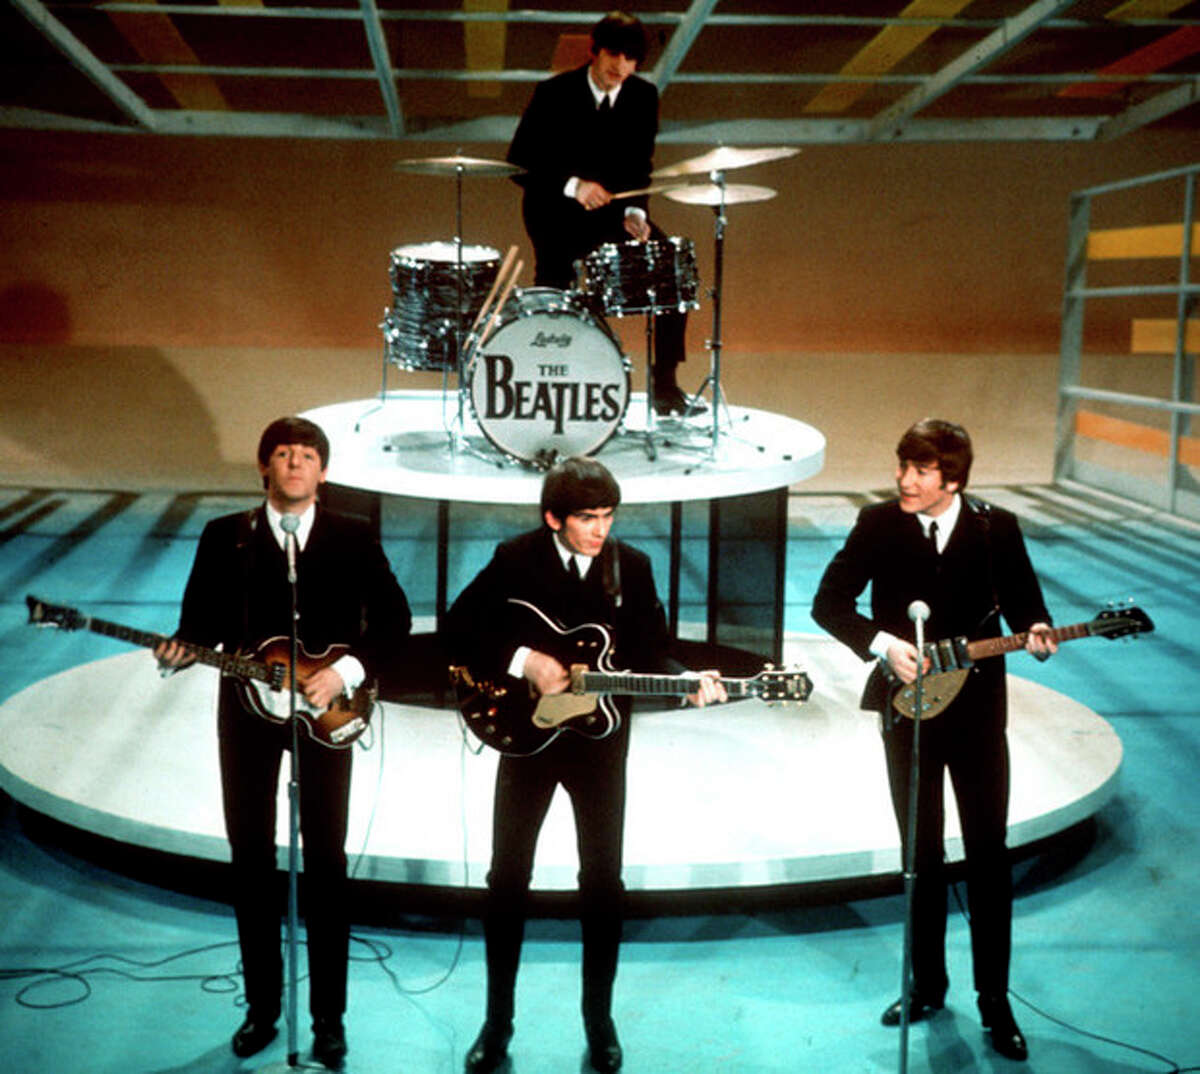 FILE - In this Feb. 9, 1964 file photo, The Beatles, clockwise from top, Ringo Starr, John Lennon, George Harrison and Paul McCartney, perform on CBS' "Ed Sullivan Show" in New York. CBS is planning a two-hour special on Feb. 9, 2014, to mark the 50th anniversary of the Beatles groundbreaking first appearance on The Ed Sullivan Show. (AP Photo, file)